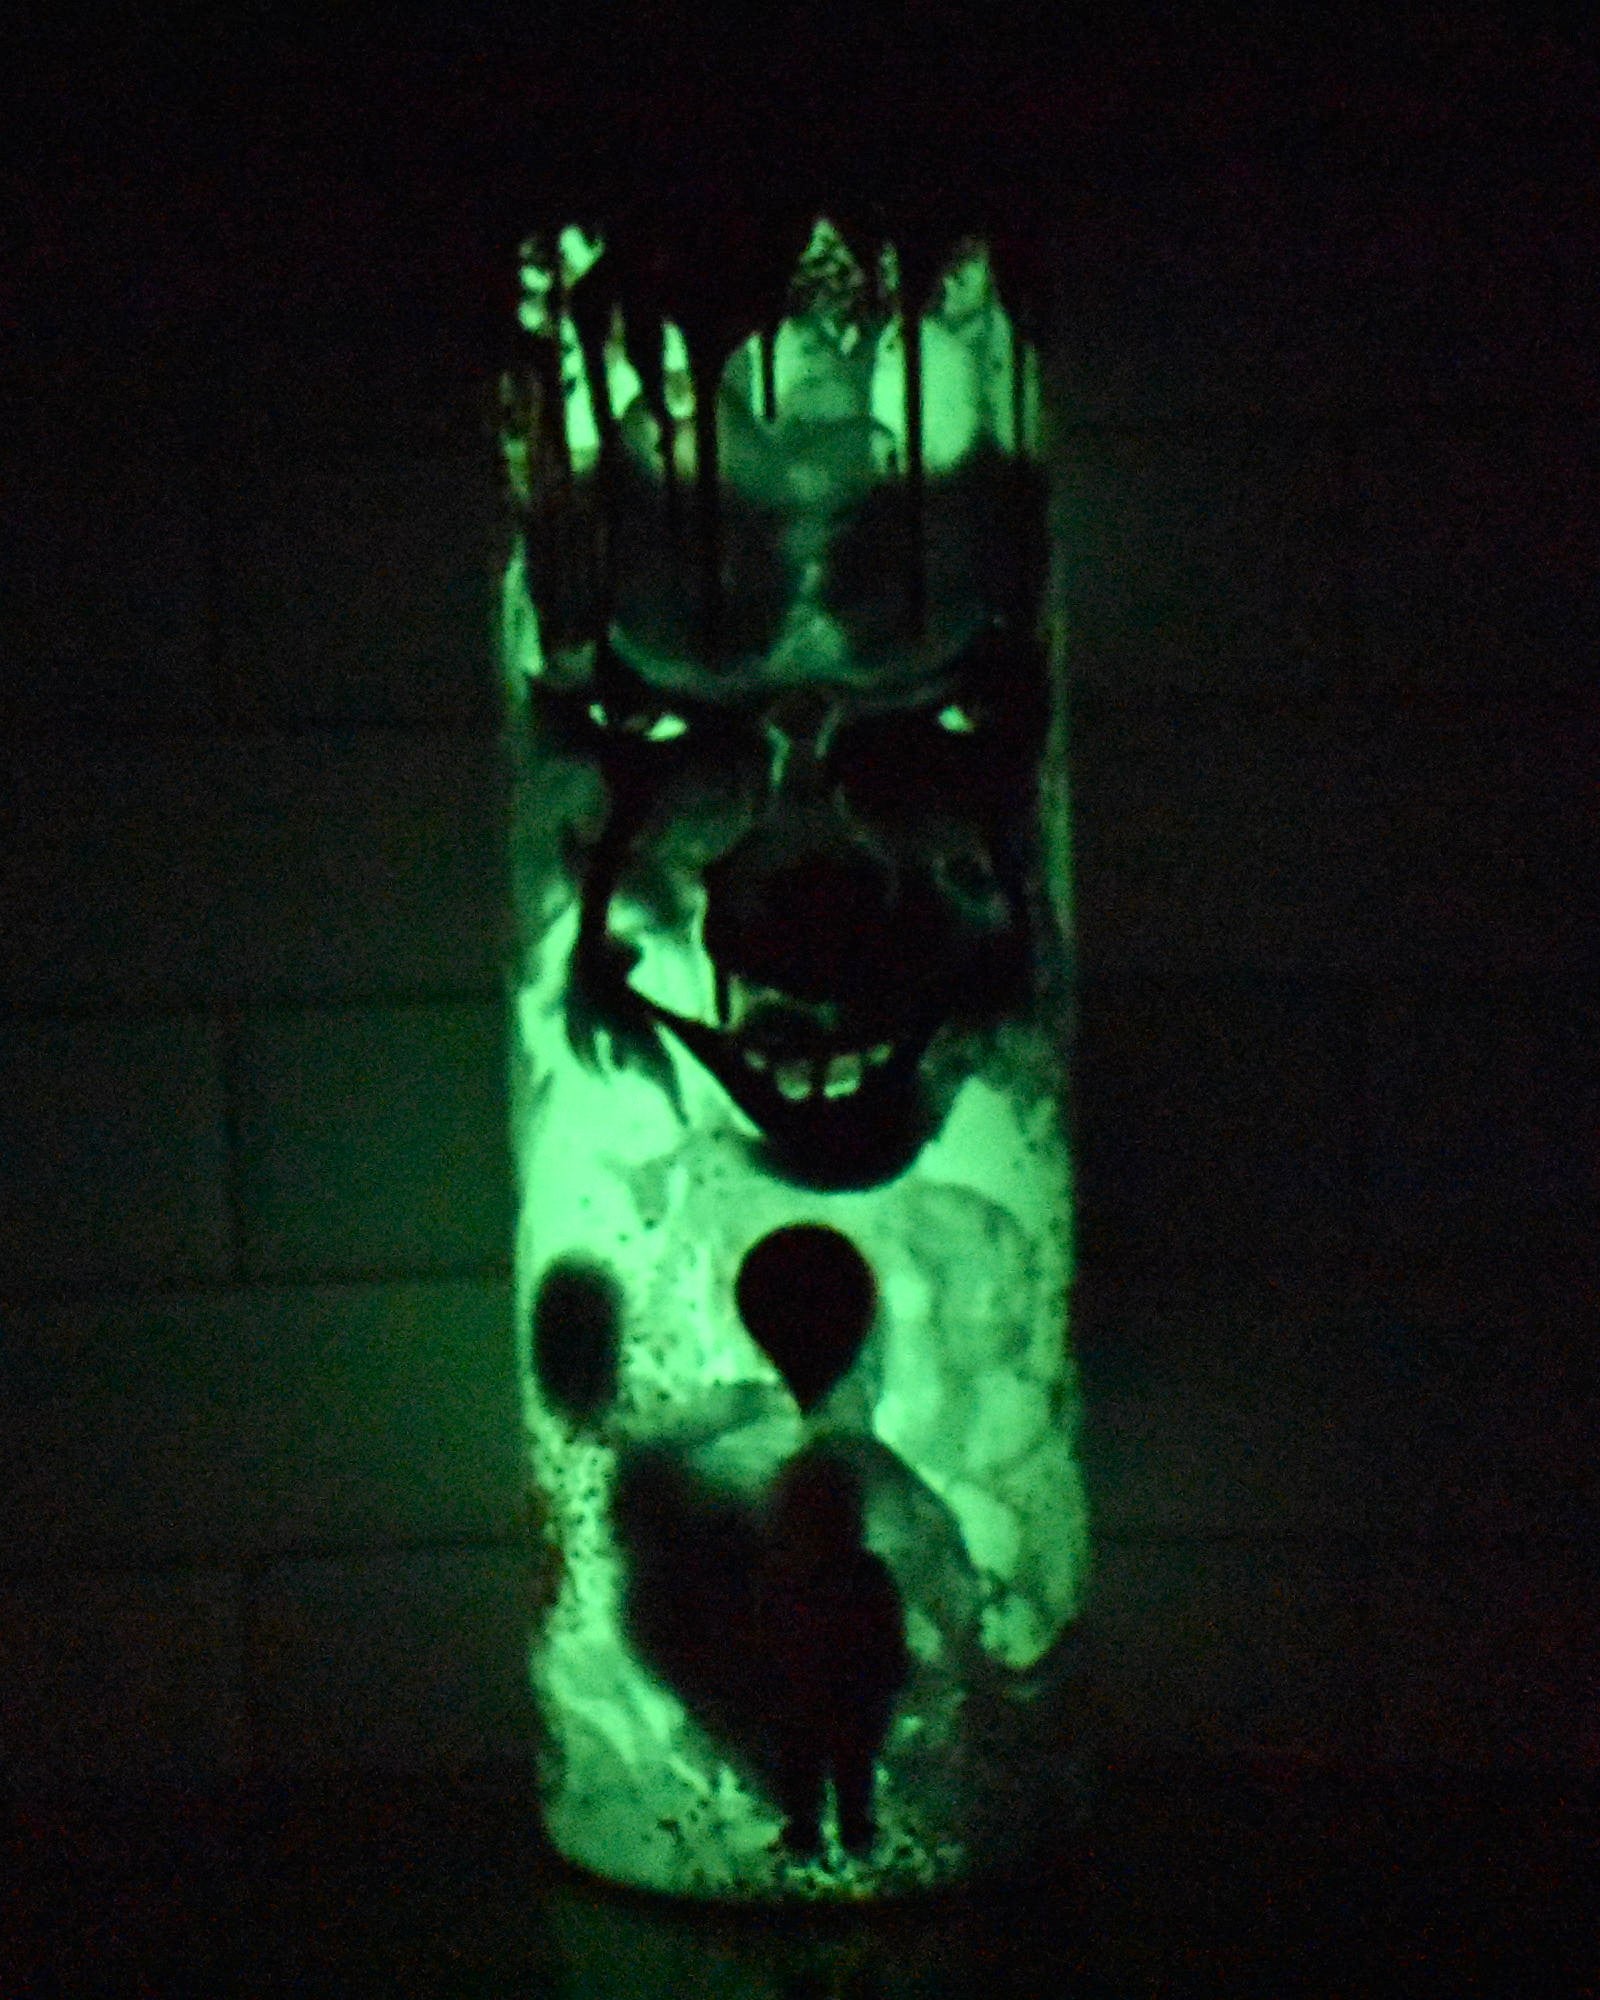 Pennywise...clowns are creepy and this one tops the list. What could make this tumbler even more scarier you ask? Turn out the lights and let this glow in the dark tumbler turn up the fright.